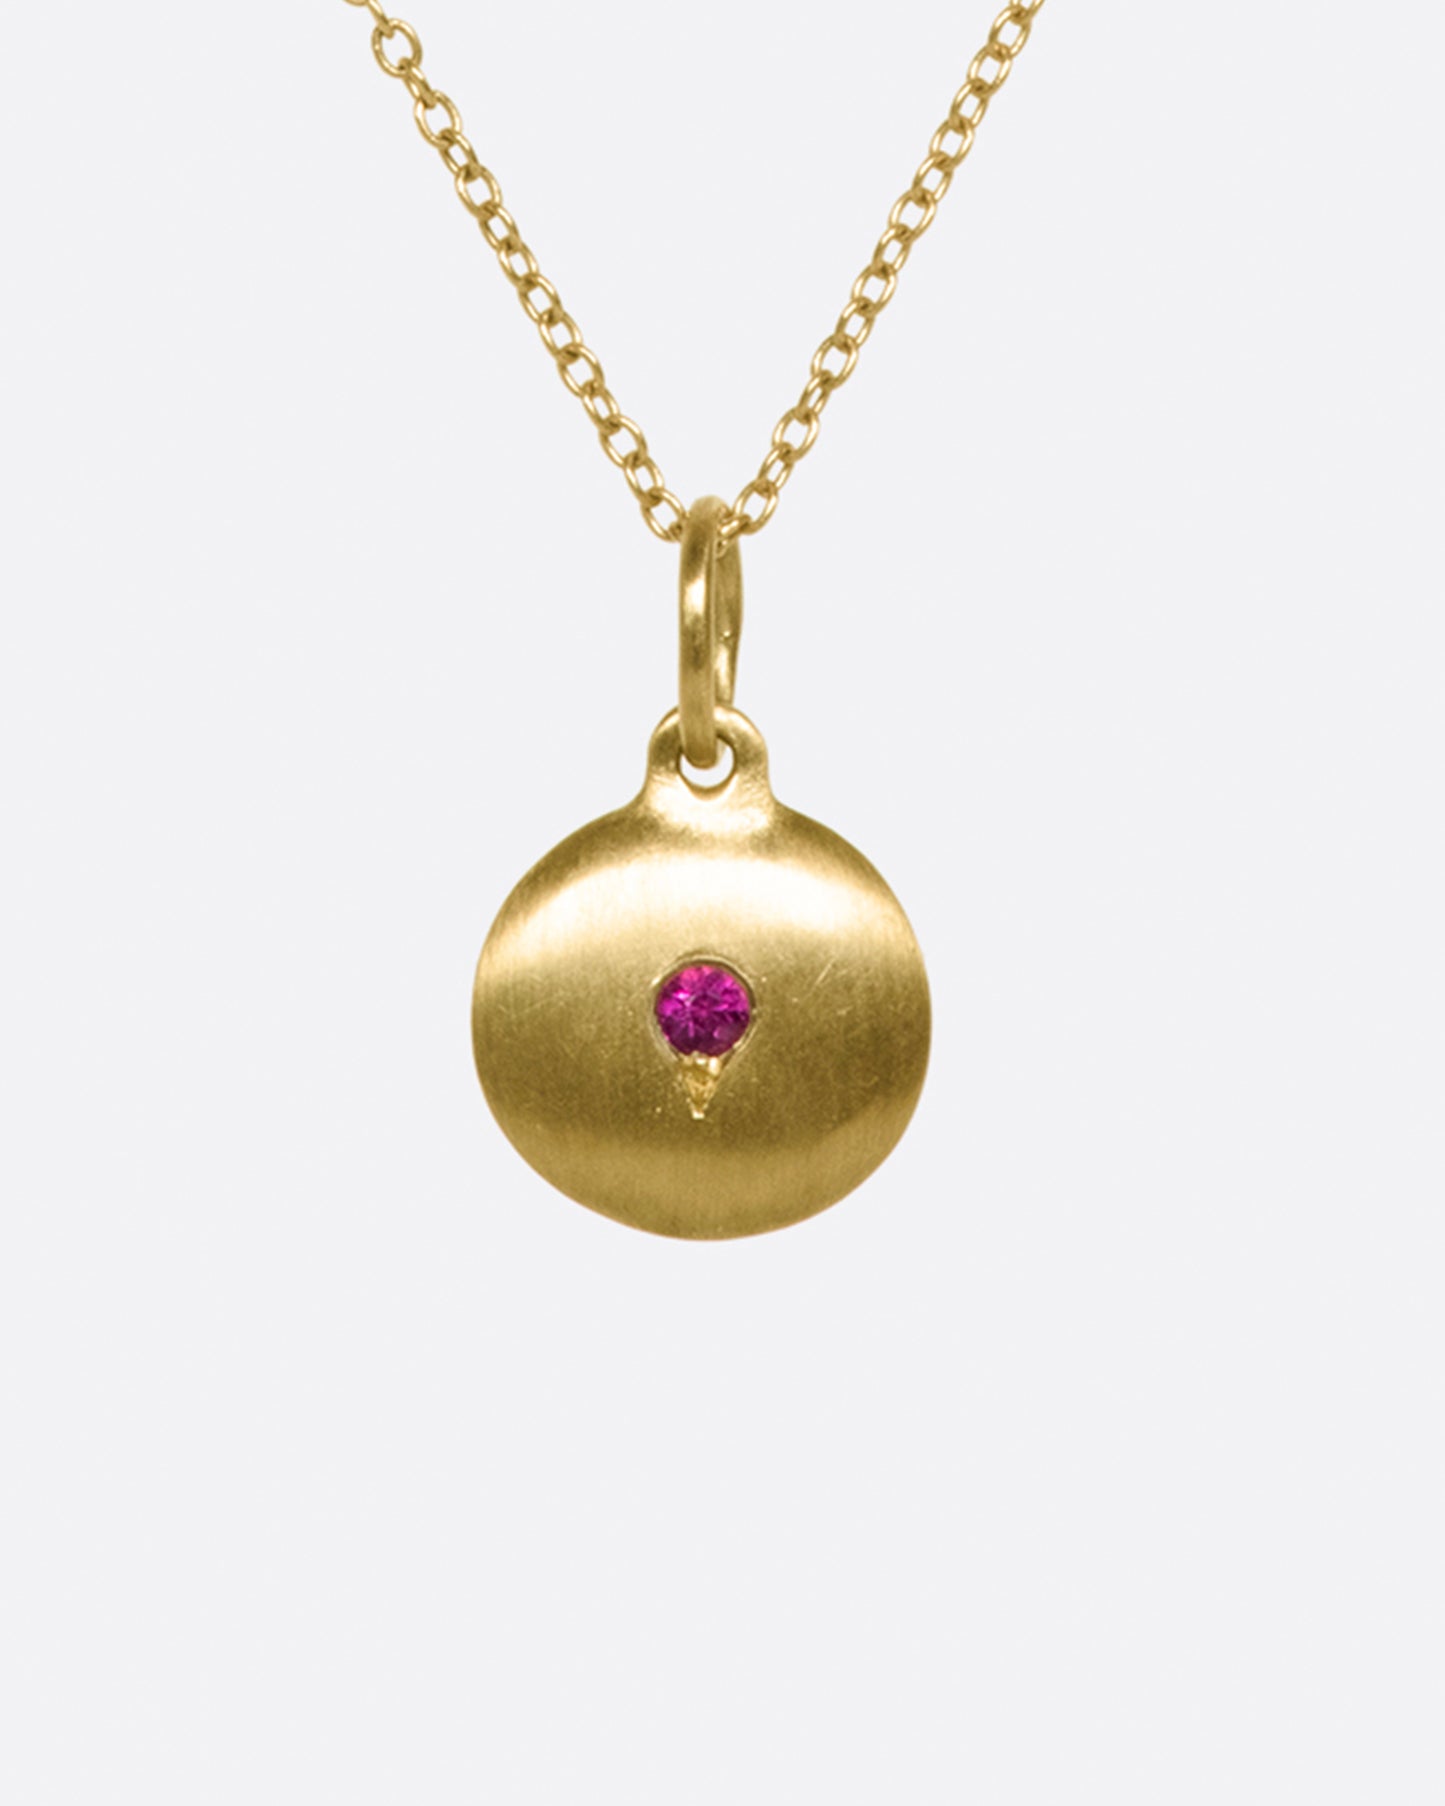 Layer this brushed gold medallion necklace with your favorite pieces; the ruby adds a little pop of color.